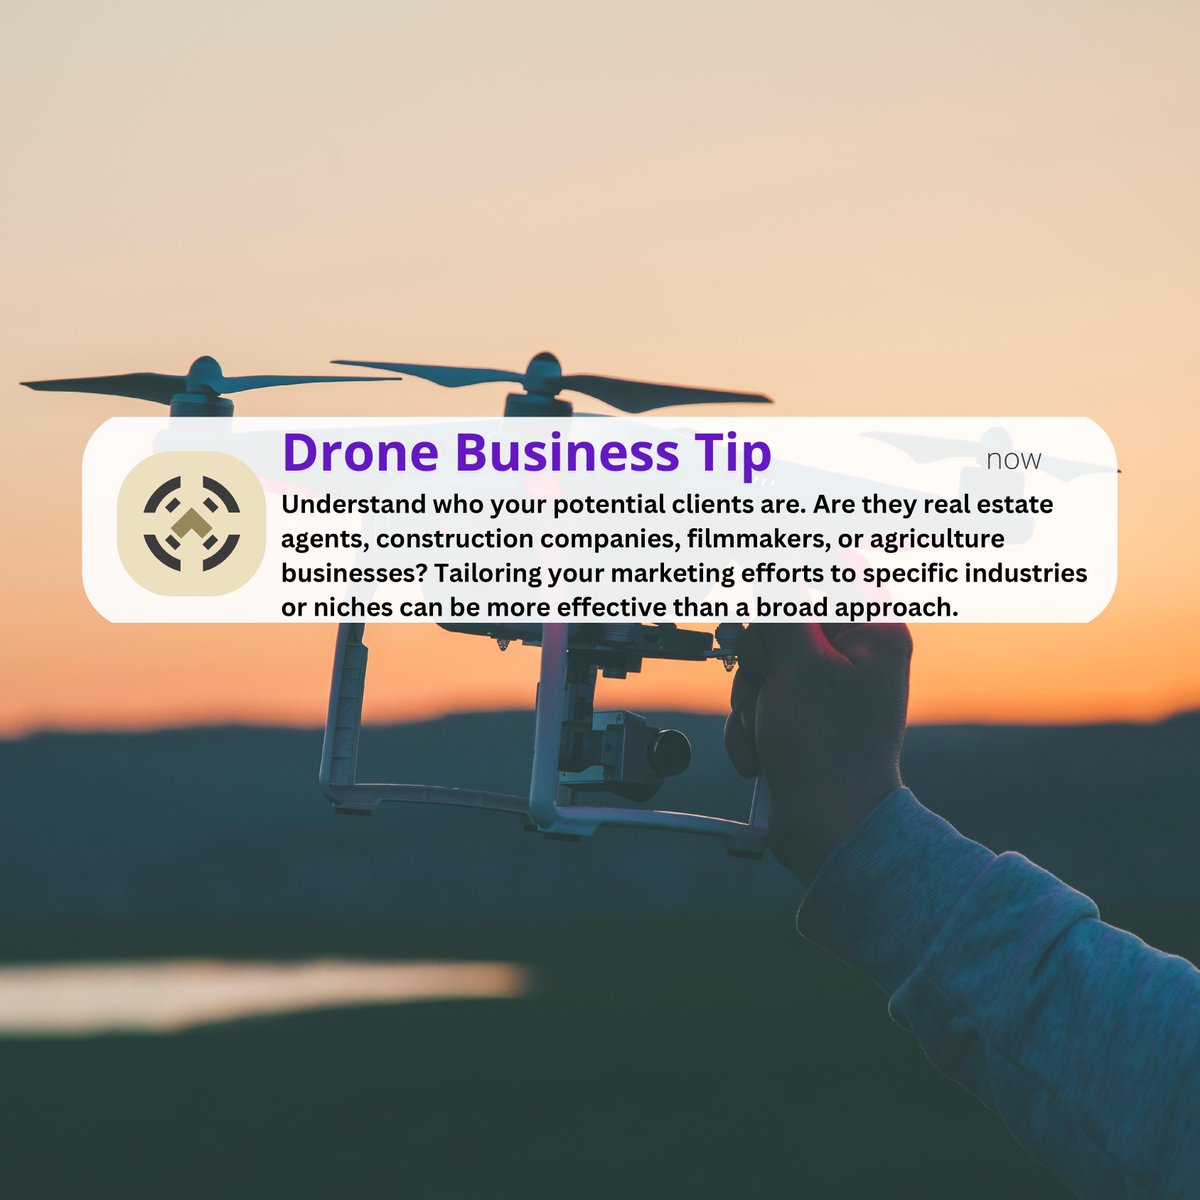 Know your audience, tailor your success. Whether it's real estate, construction, film, or agriculture, understanding your clients unlocks targeted marketing that drives real results. 

#droneservices #aerialphotography #dronestagram #dronelife
#dronepilot #droneshots #dronebus...